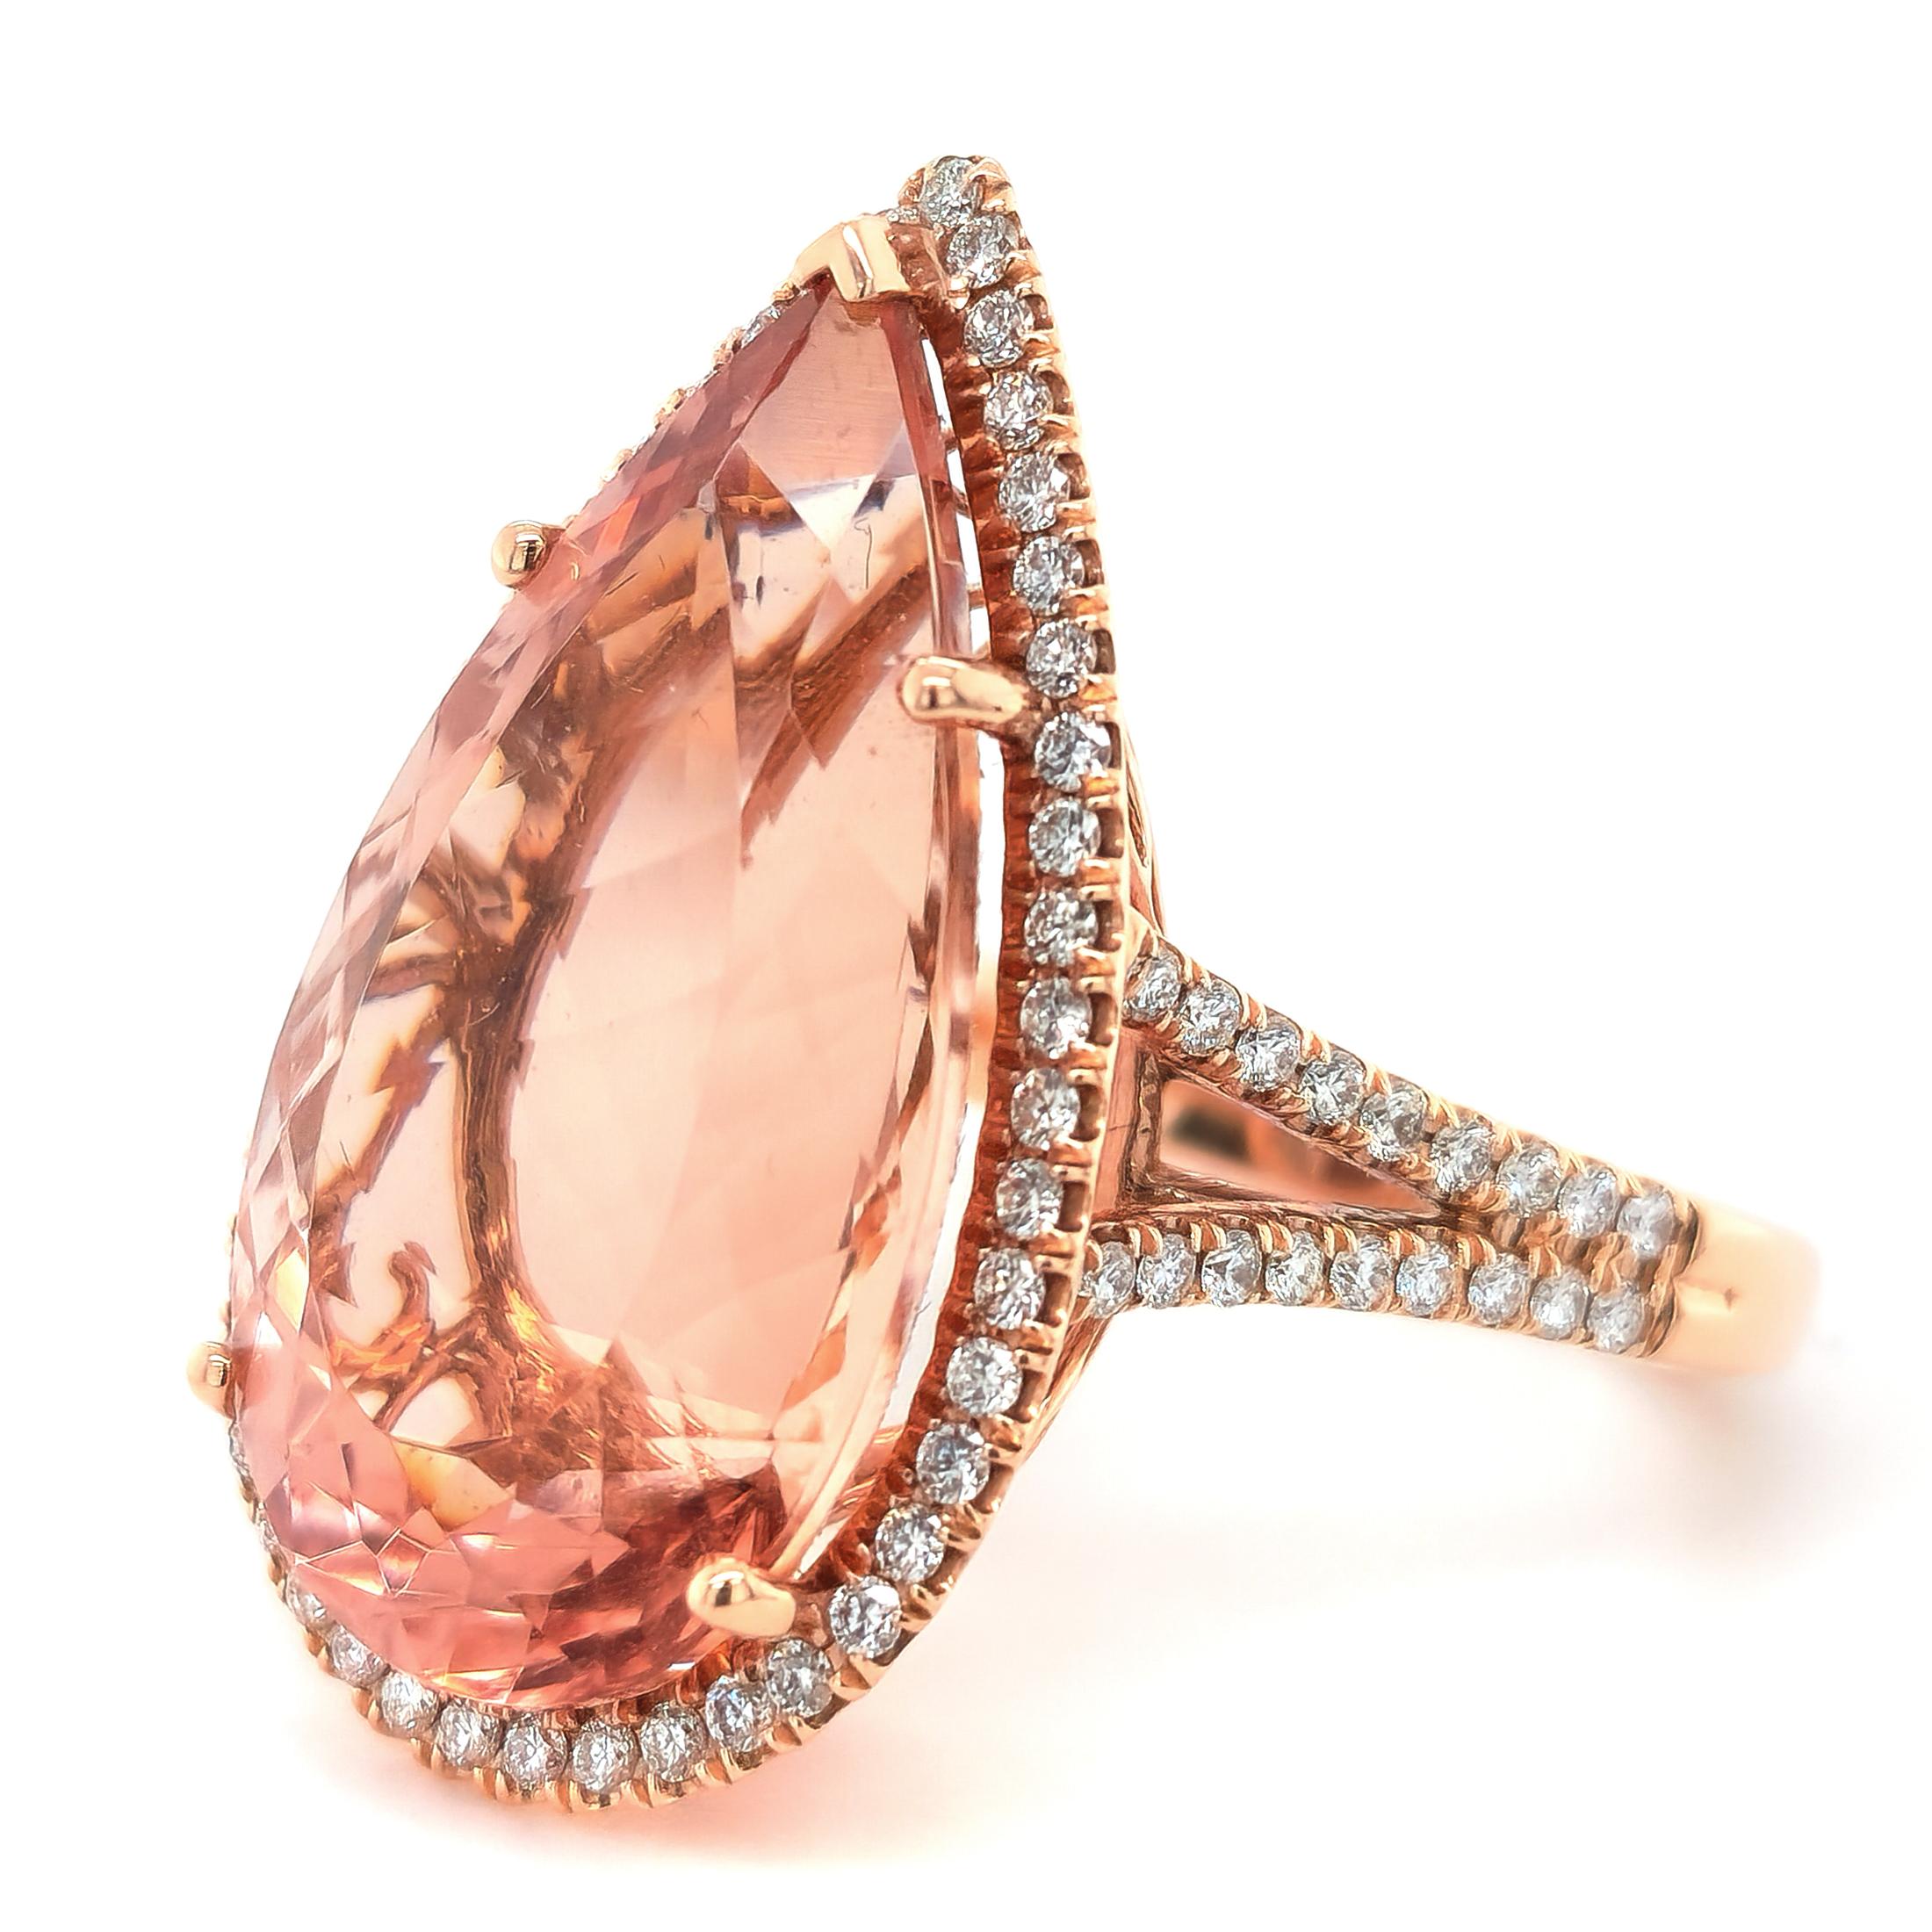 Lovely gemstones set in rose gold, this 16.00 carat mystical Morganite adds a touch of fresh sexiness to this ring. Set in 14K gold, there will be no denying the durability of this ring paired with the everlasting salmon colored beryl. Although